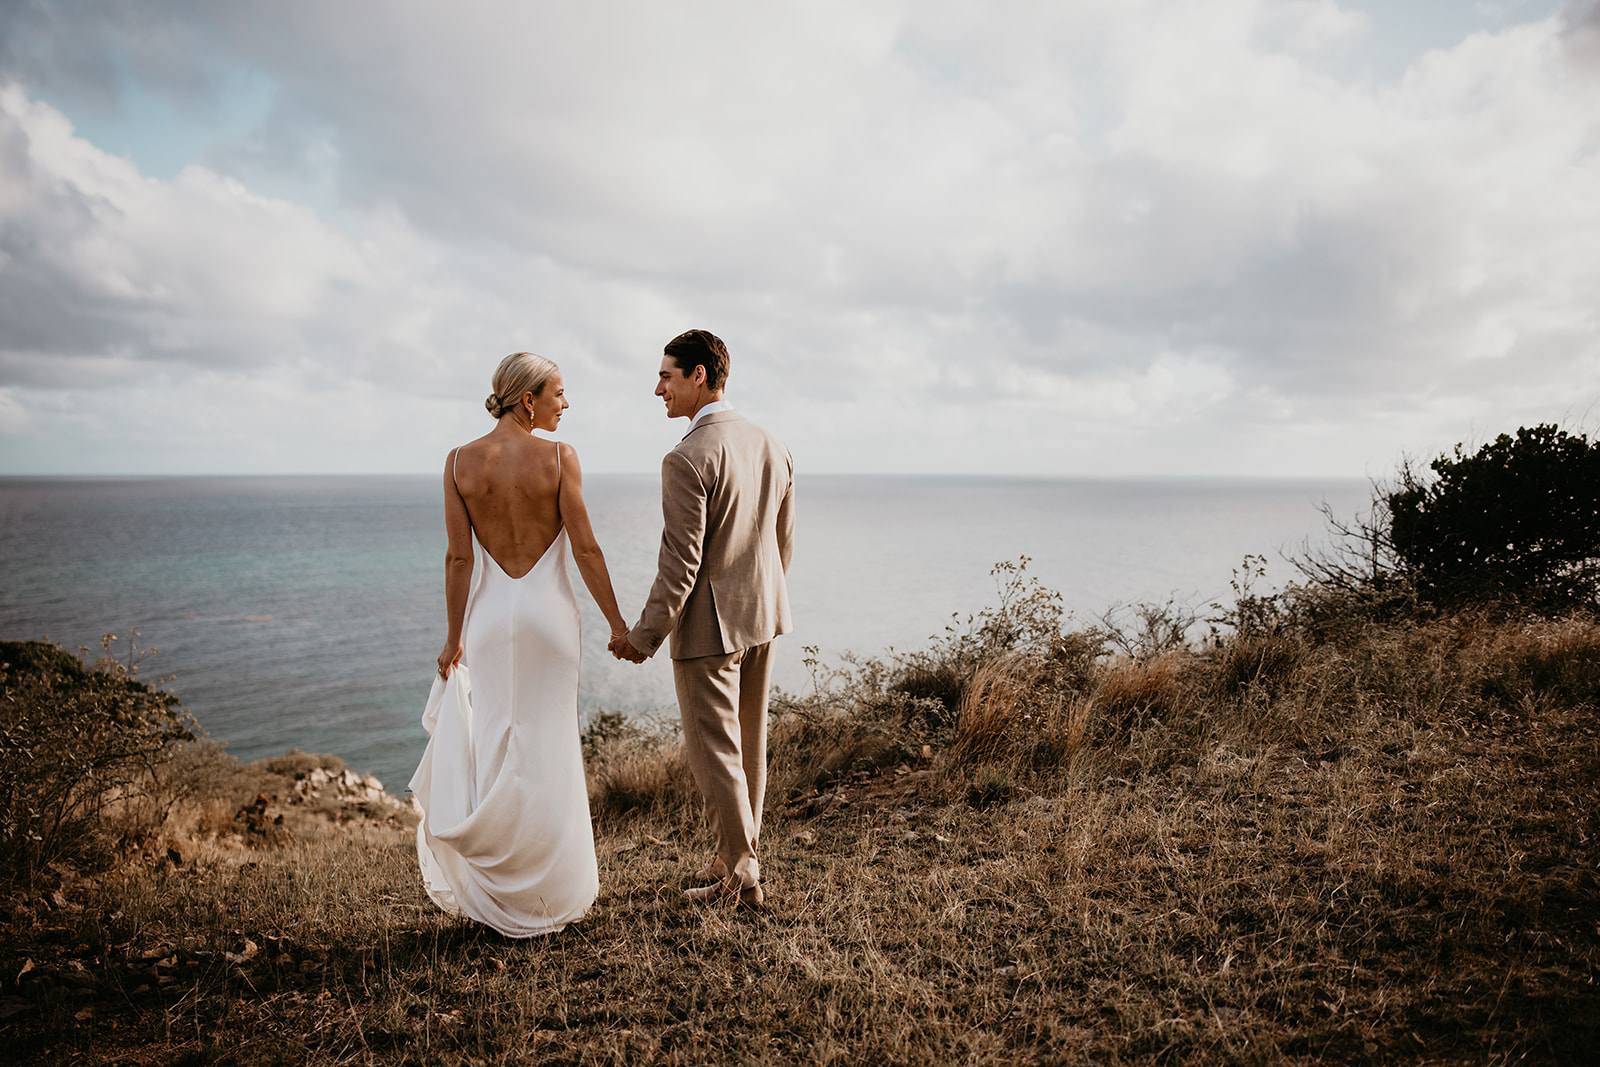 Candid moment of the bride and groom walking along a rocky shoreline in the British Virgin Islands